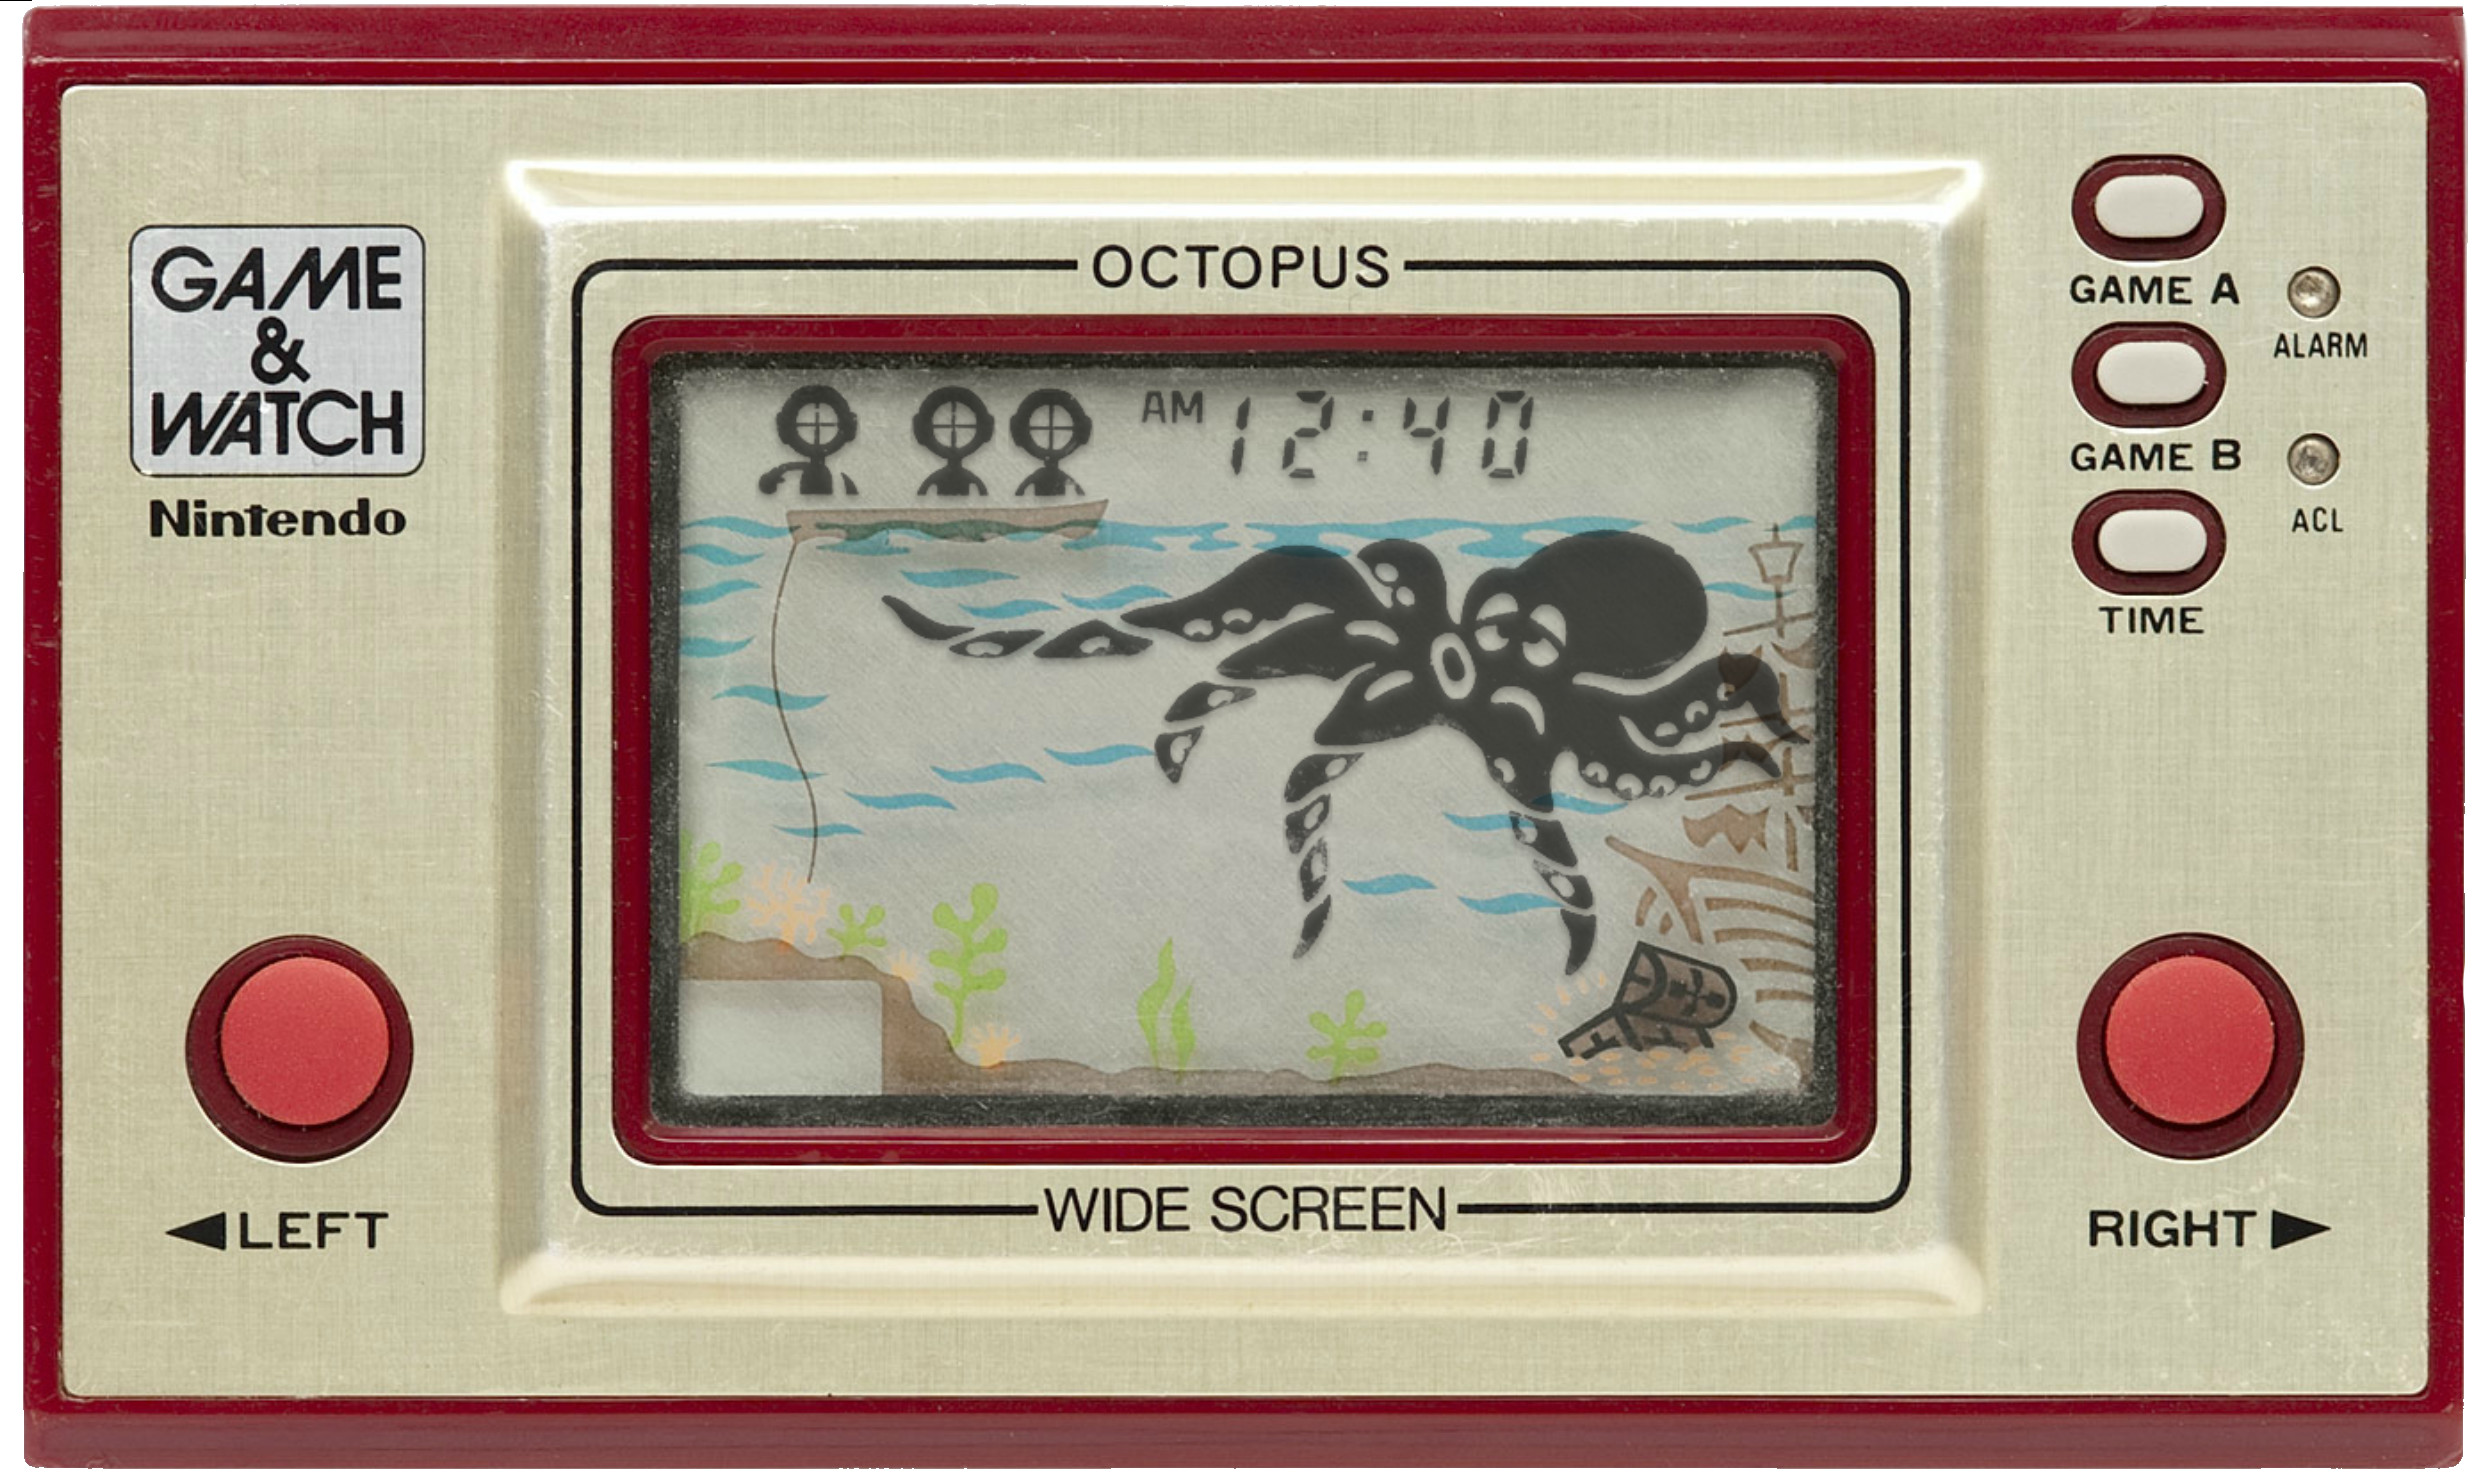 Le jeu Octopus sur Game and Watch // Source : Pica-Pic.com